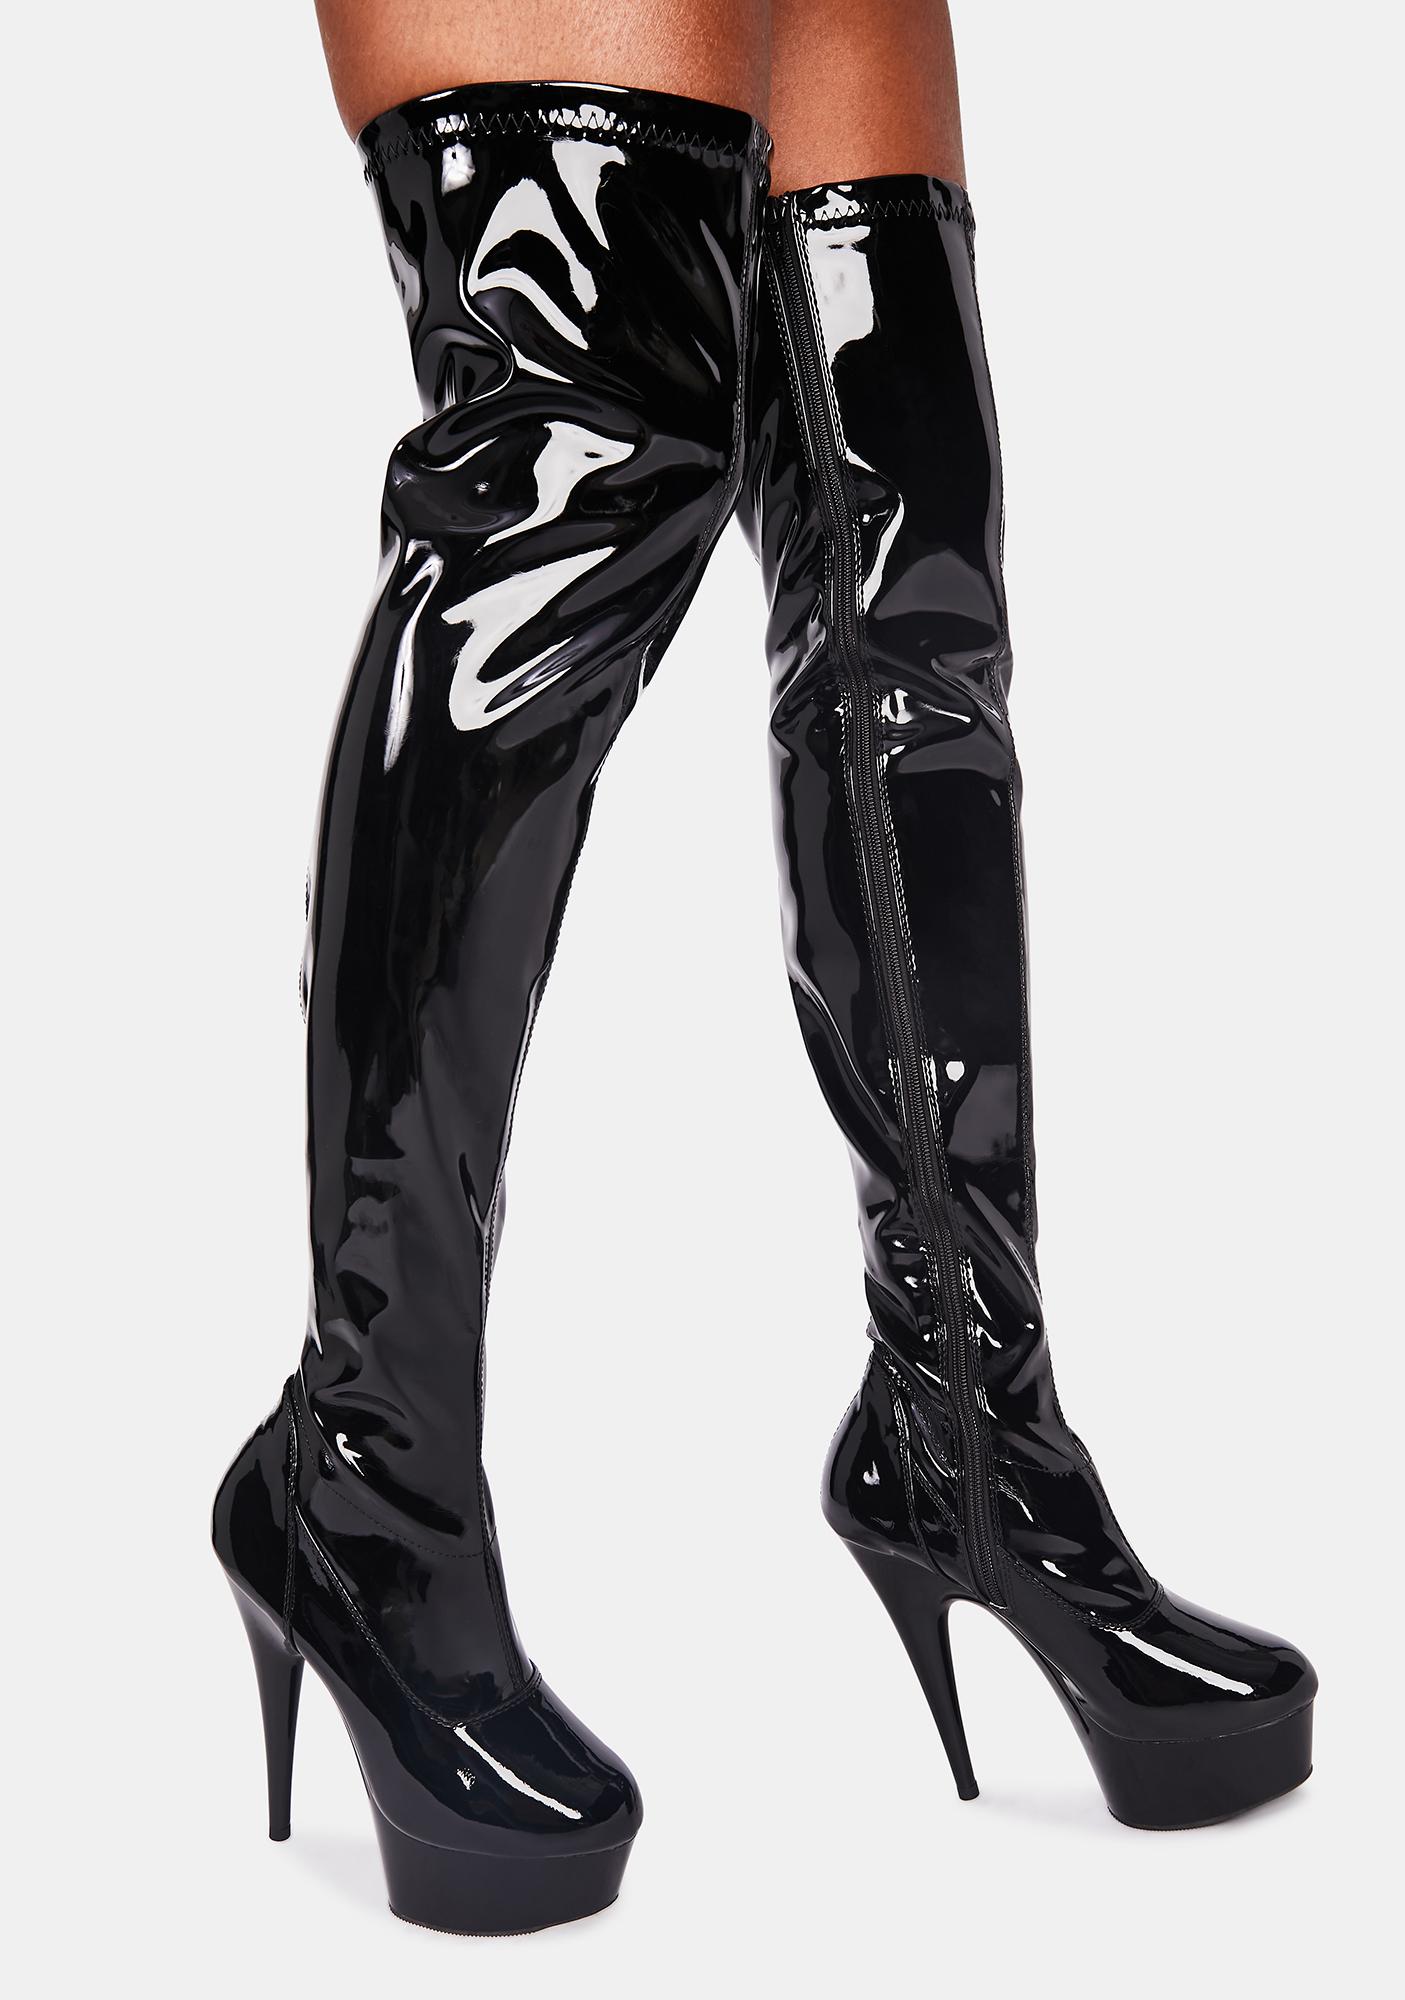 Pleaser Delight 3000 Patent Thigh High Boots - Black | Dolls Kill